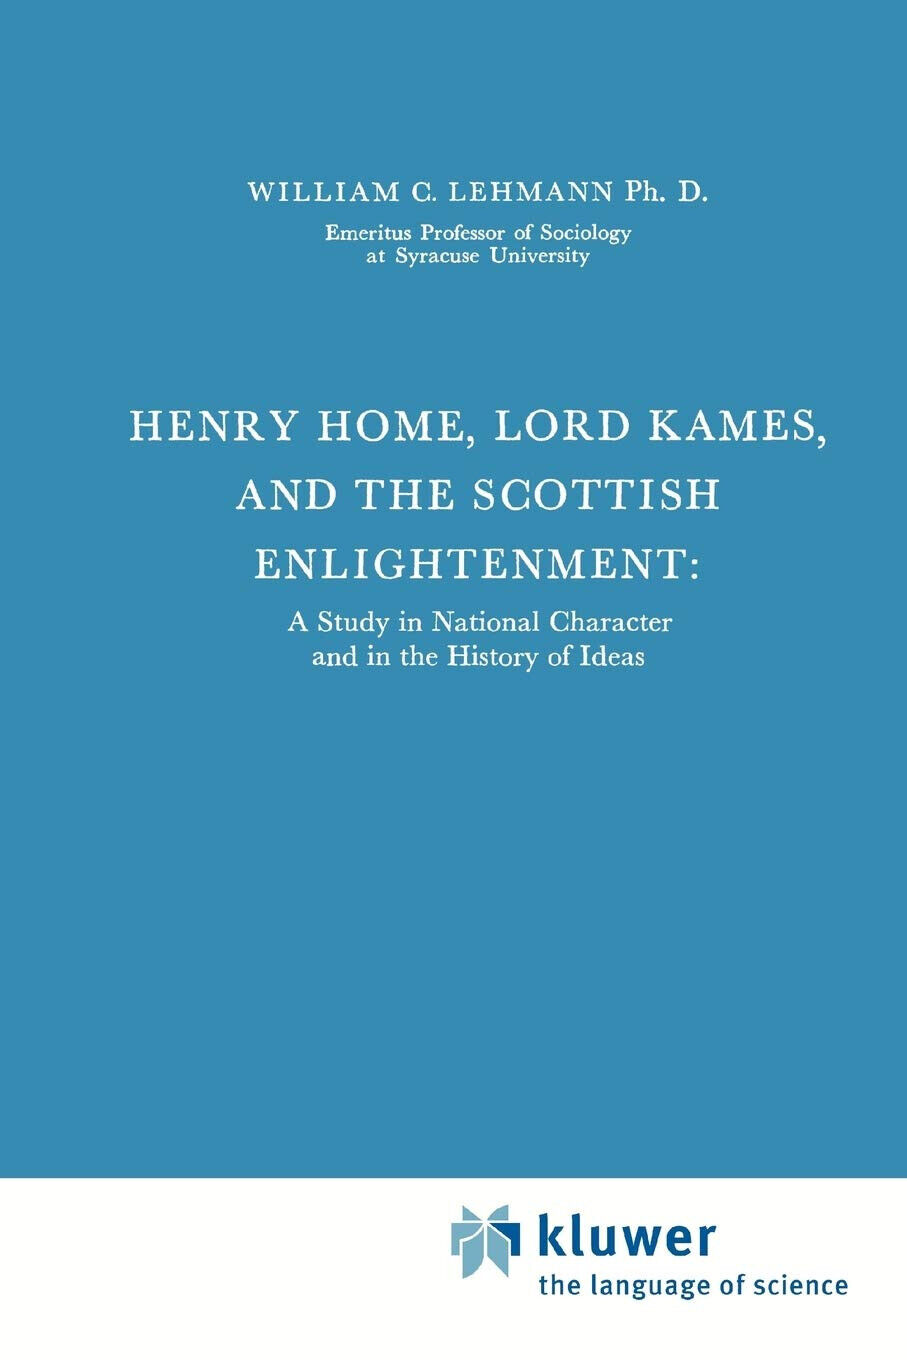 Henry Home, Lord Kames and the Scottish Enlightenment - William C. Lehmann- 2010